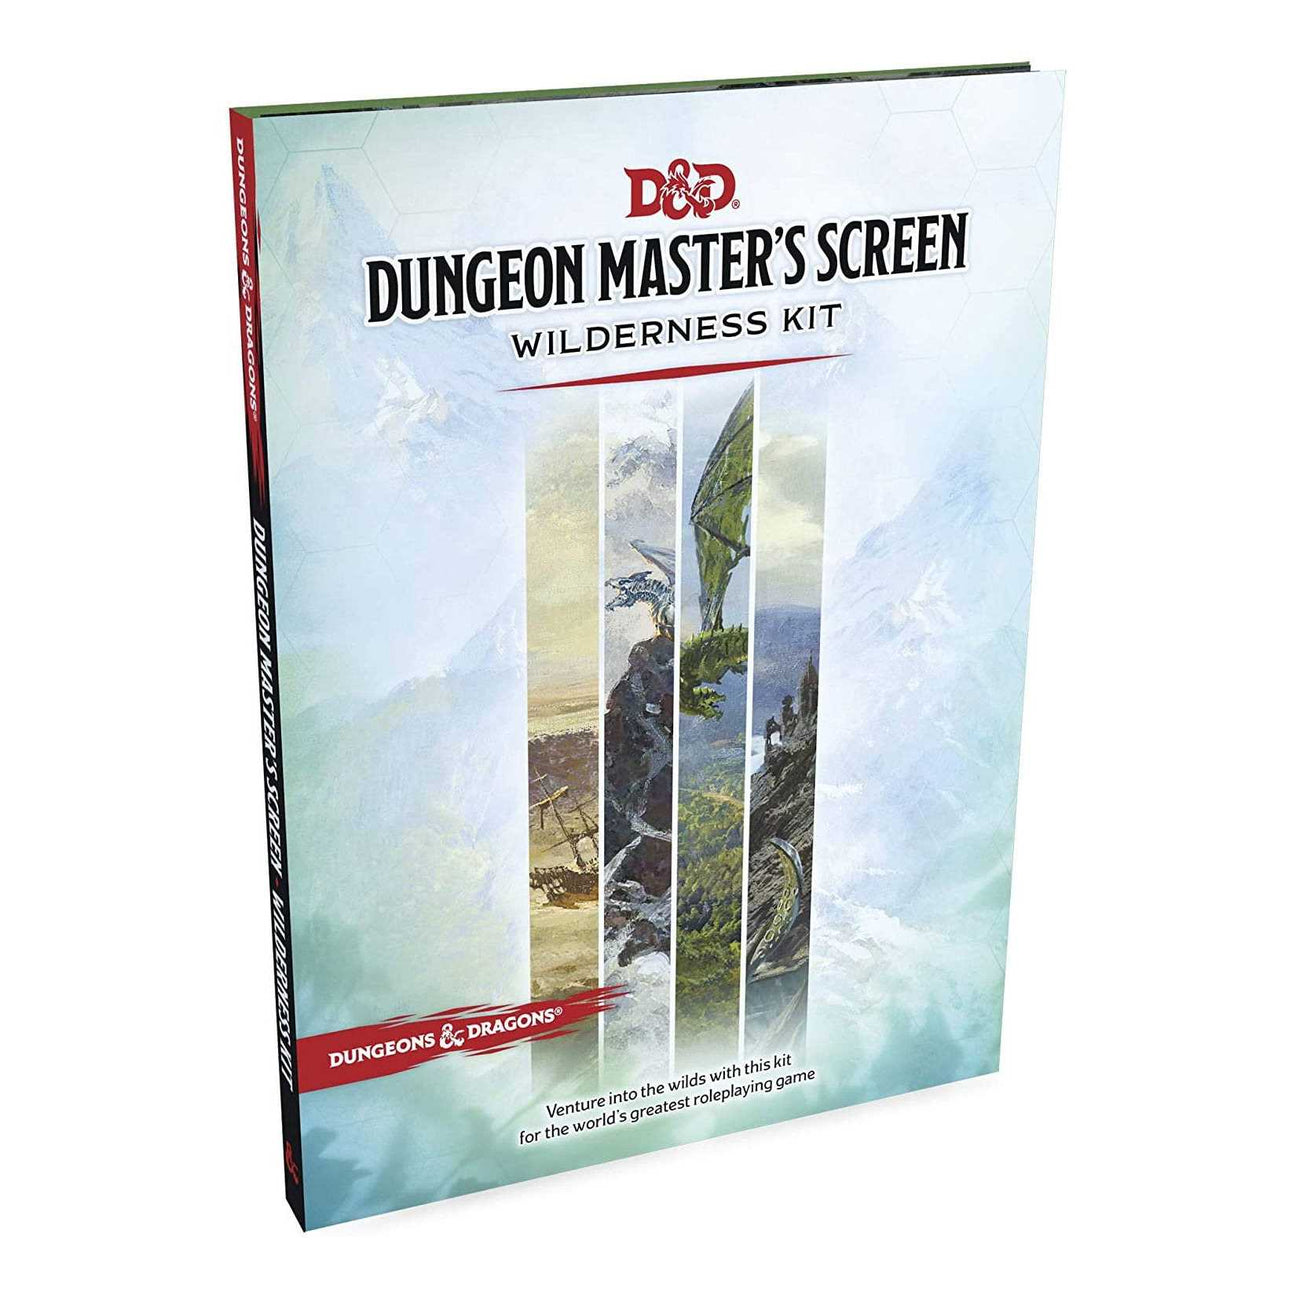 Dungeon Masters Screen Wilderness Kit: Dungeons and Dragons RPG (T.O.S.) -  Wizards of the Coast